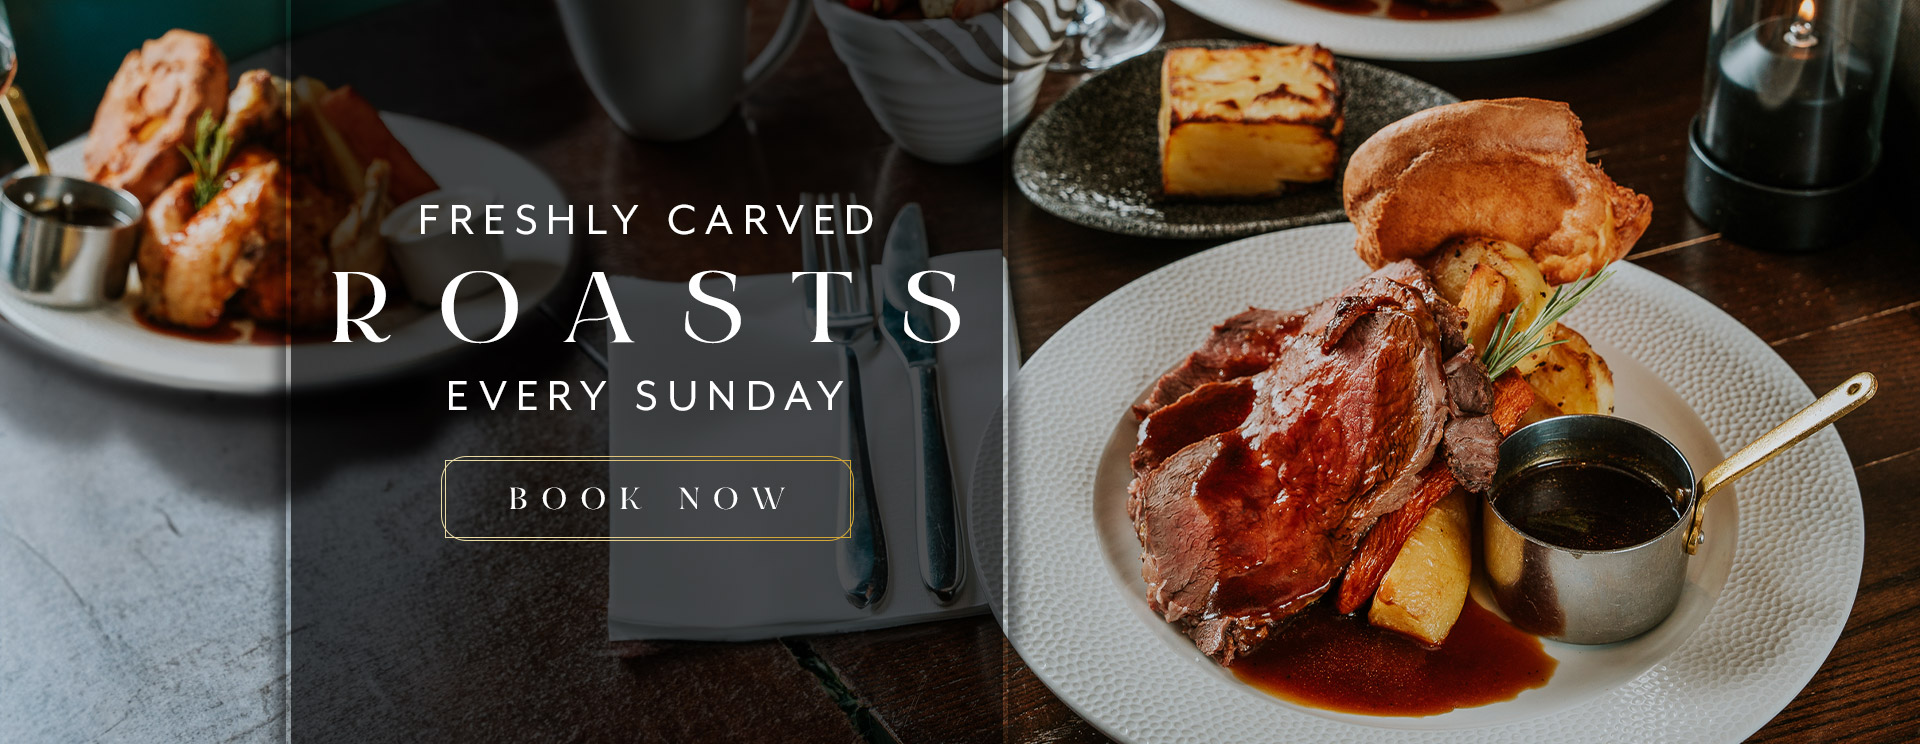 Sunday Lunch at The Rose & Crown